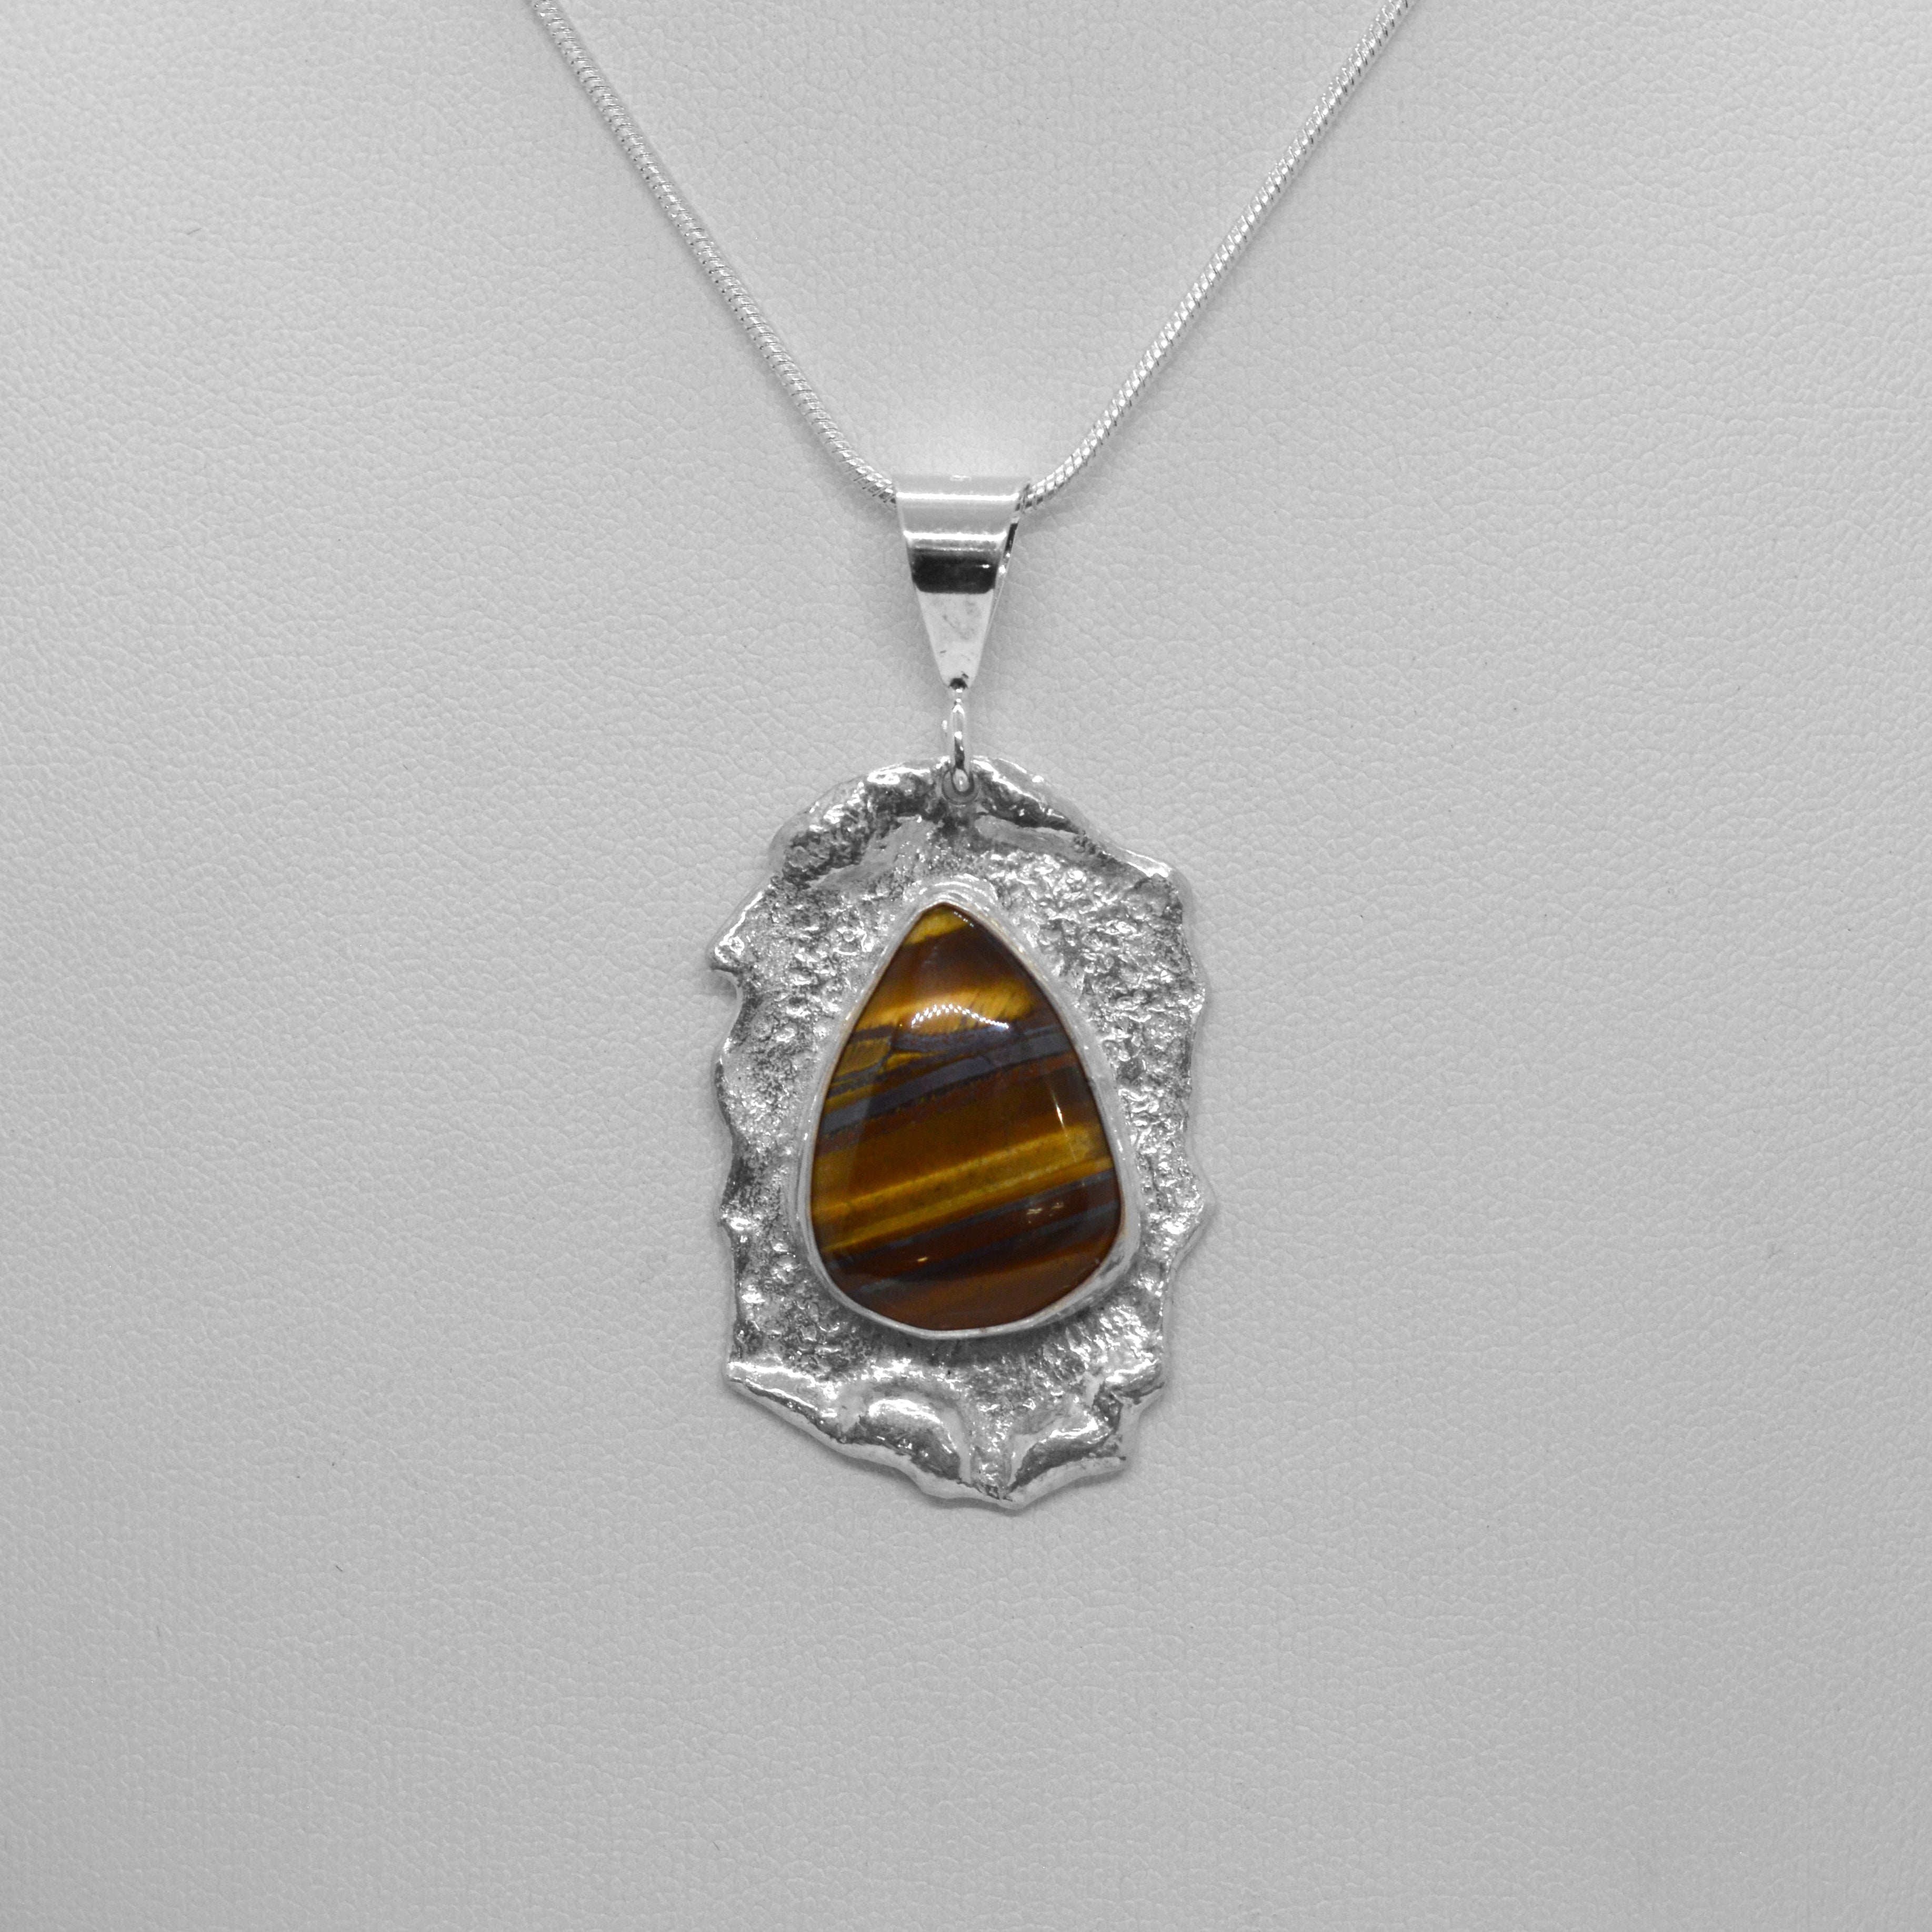 Reticulated Silver and Tigers Eye Pendant